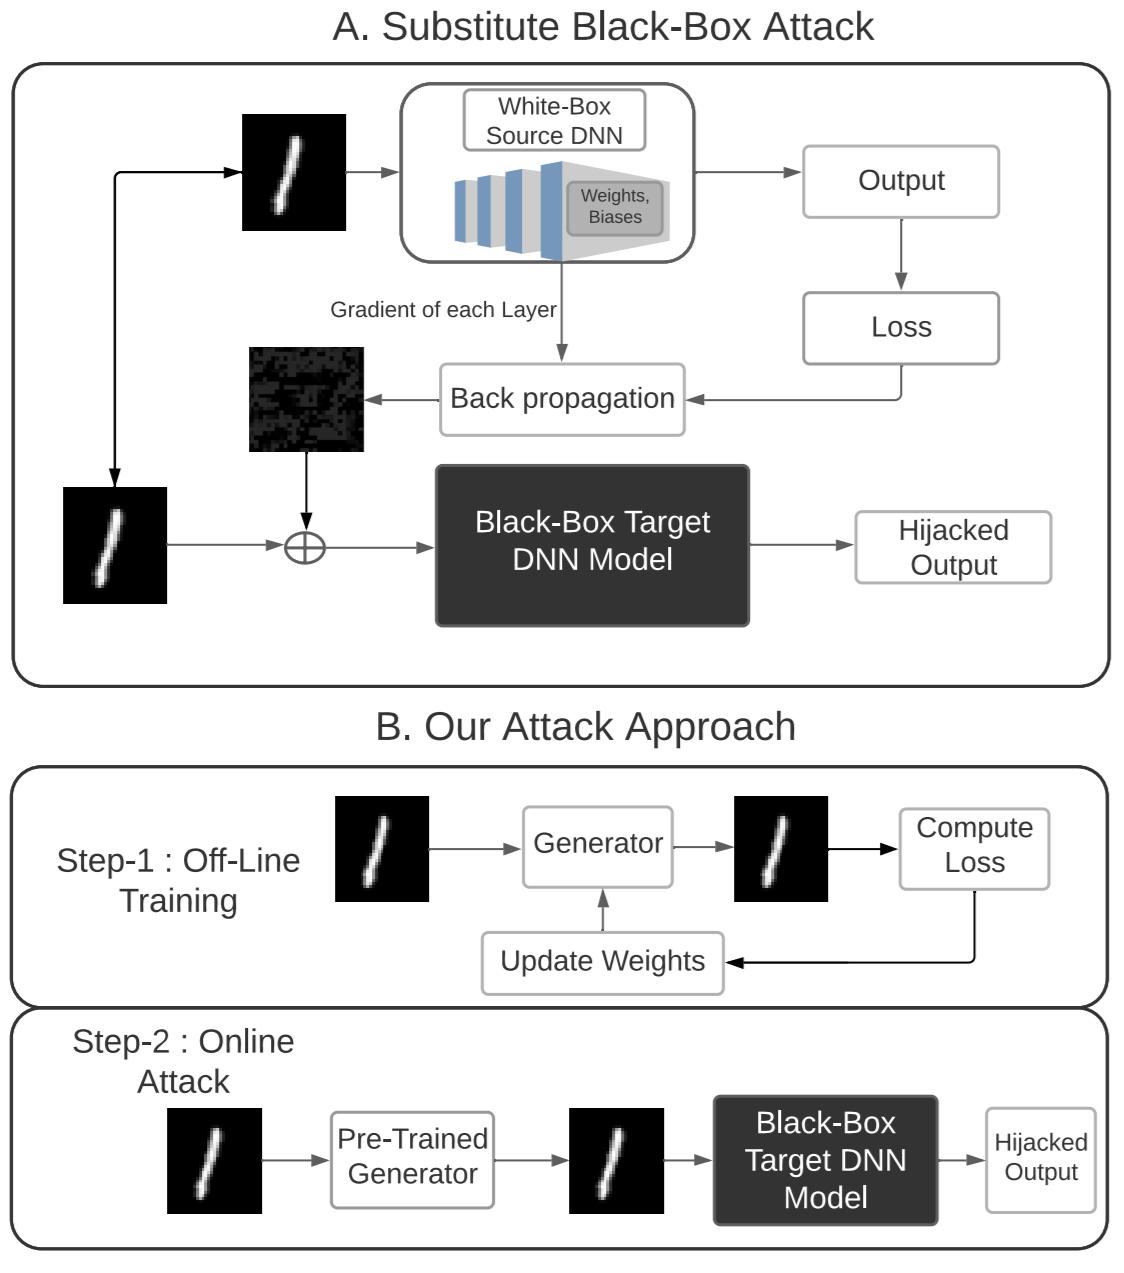 Figure 5: Comparison of traditional substitute black-box attack versus our attack approach based on a trained universal adversarial example generator.